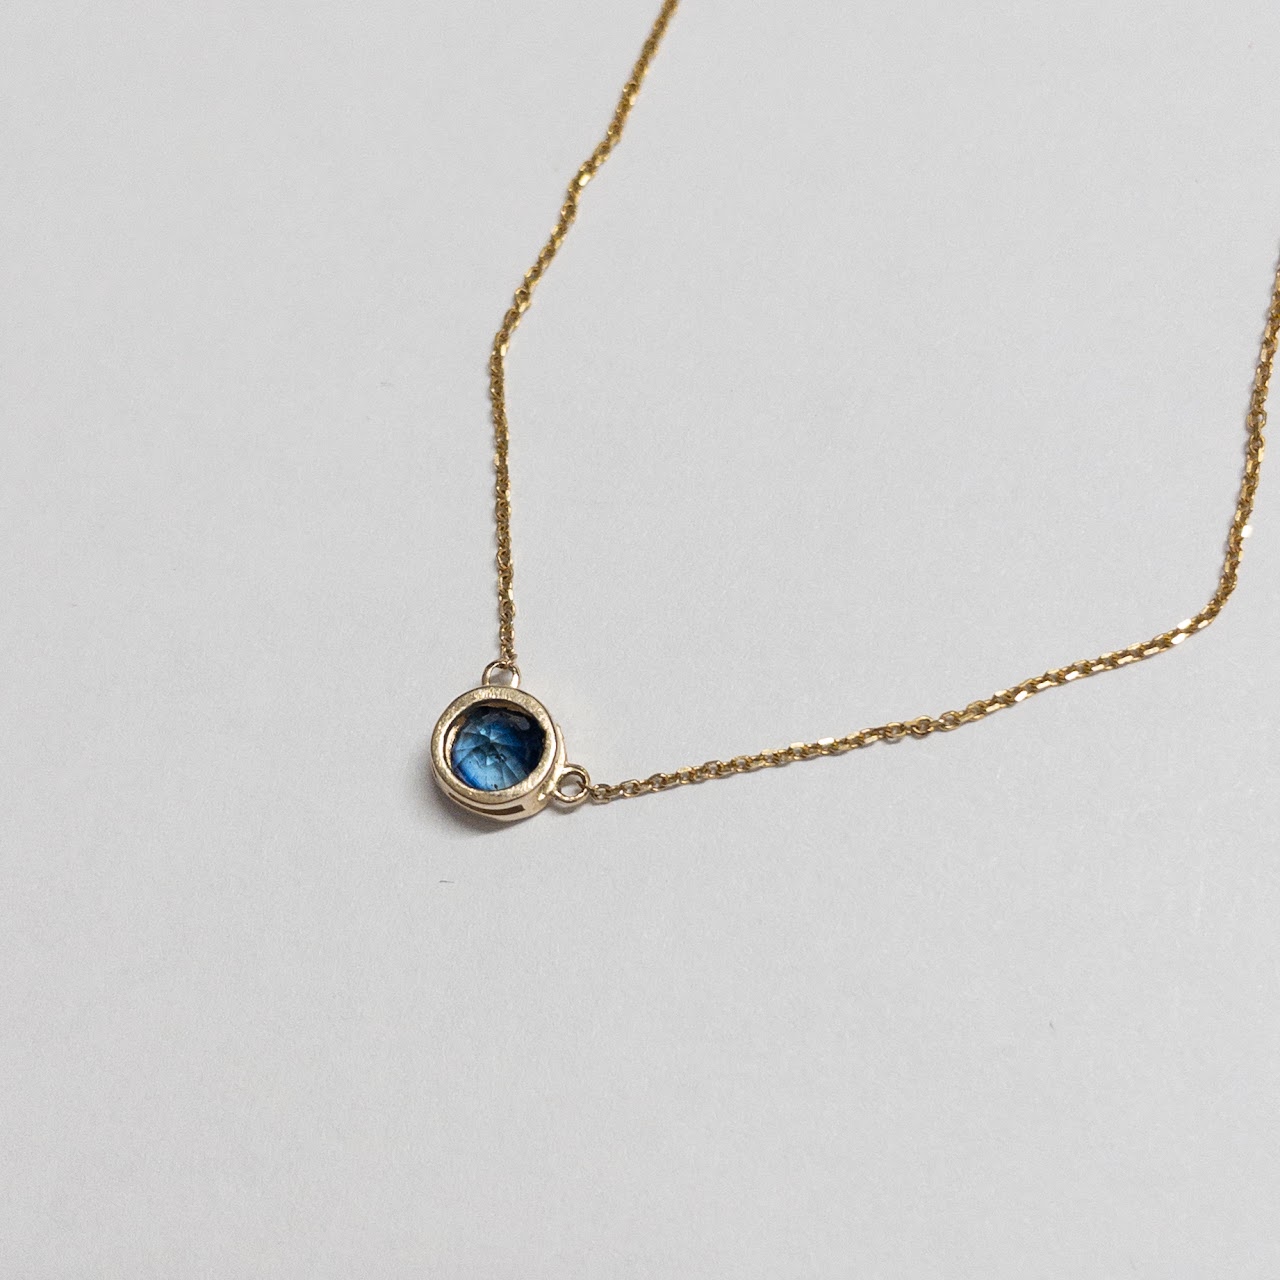 14K Gold and Blue Stone Pendant Necklace